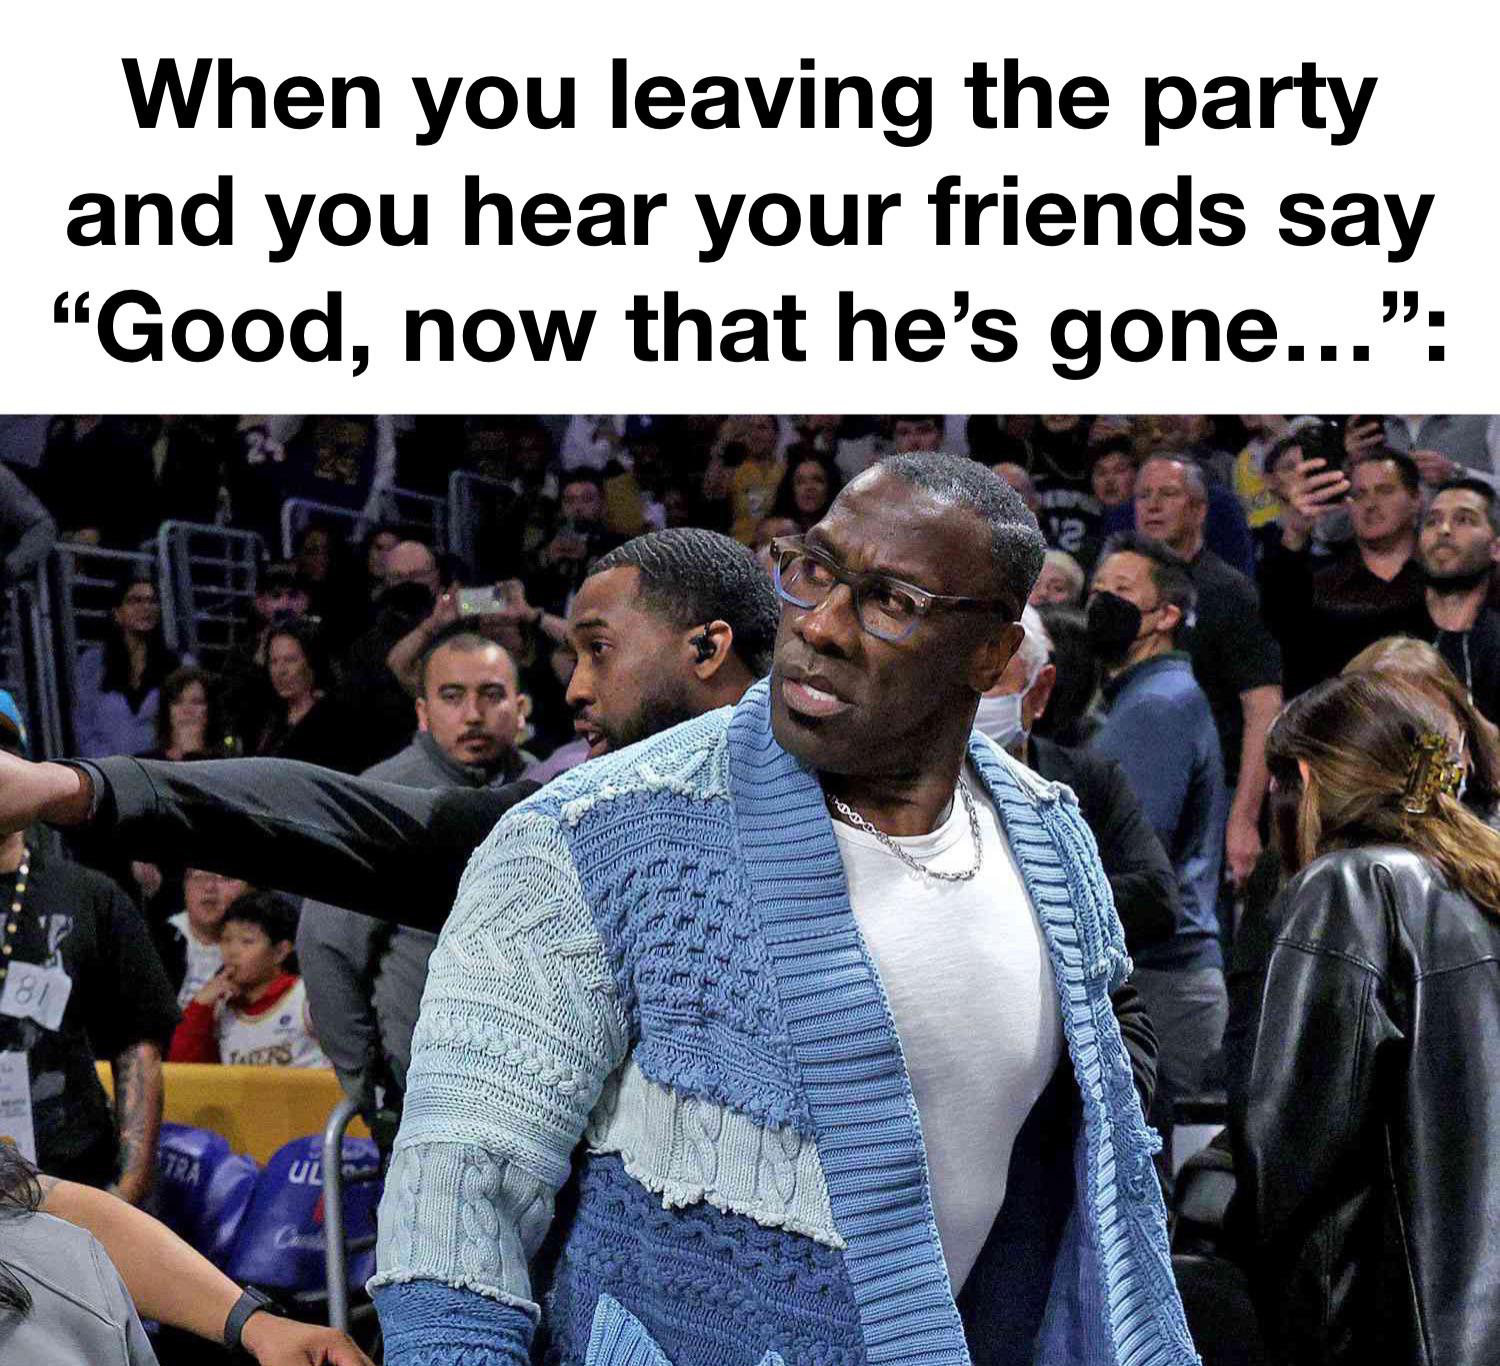 funny memes and pics - crowd - When you leaving the party and you hear your friends say "Good, now that he's gone..." 1.70 Ul